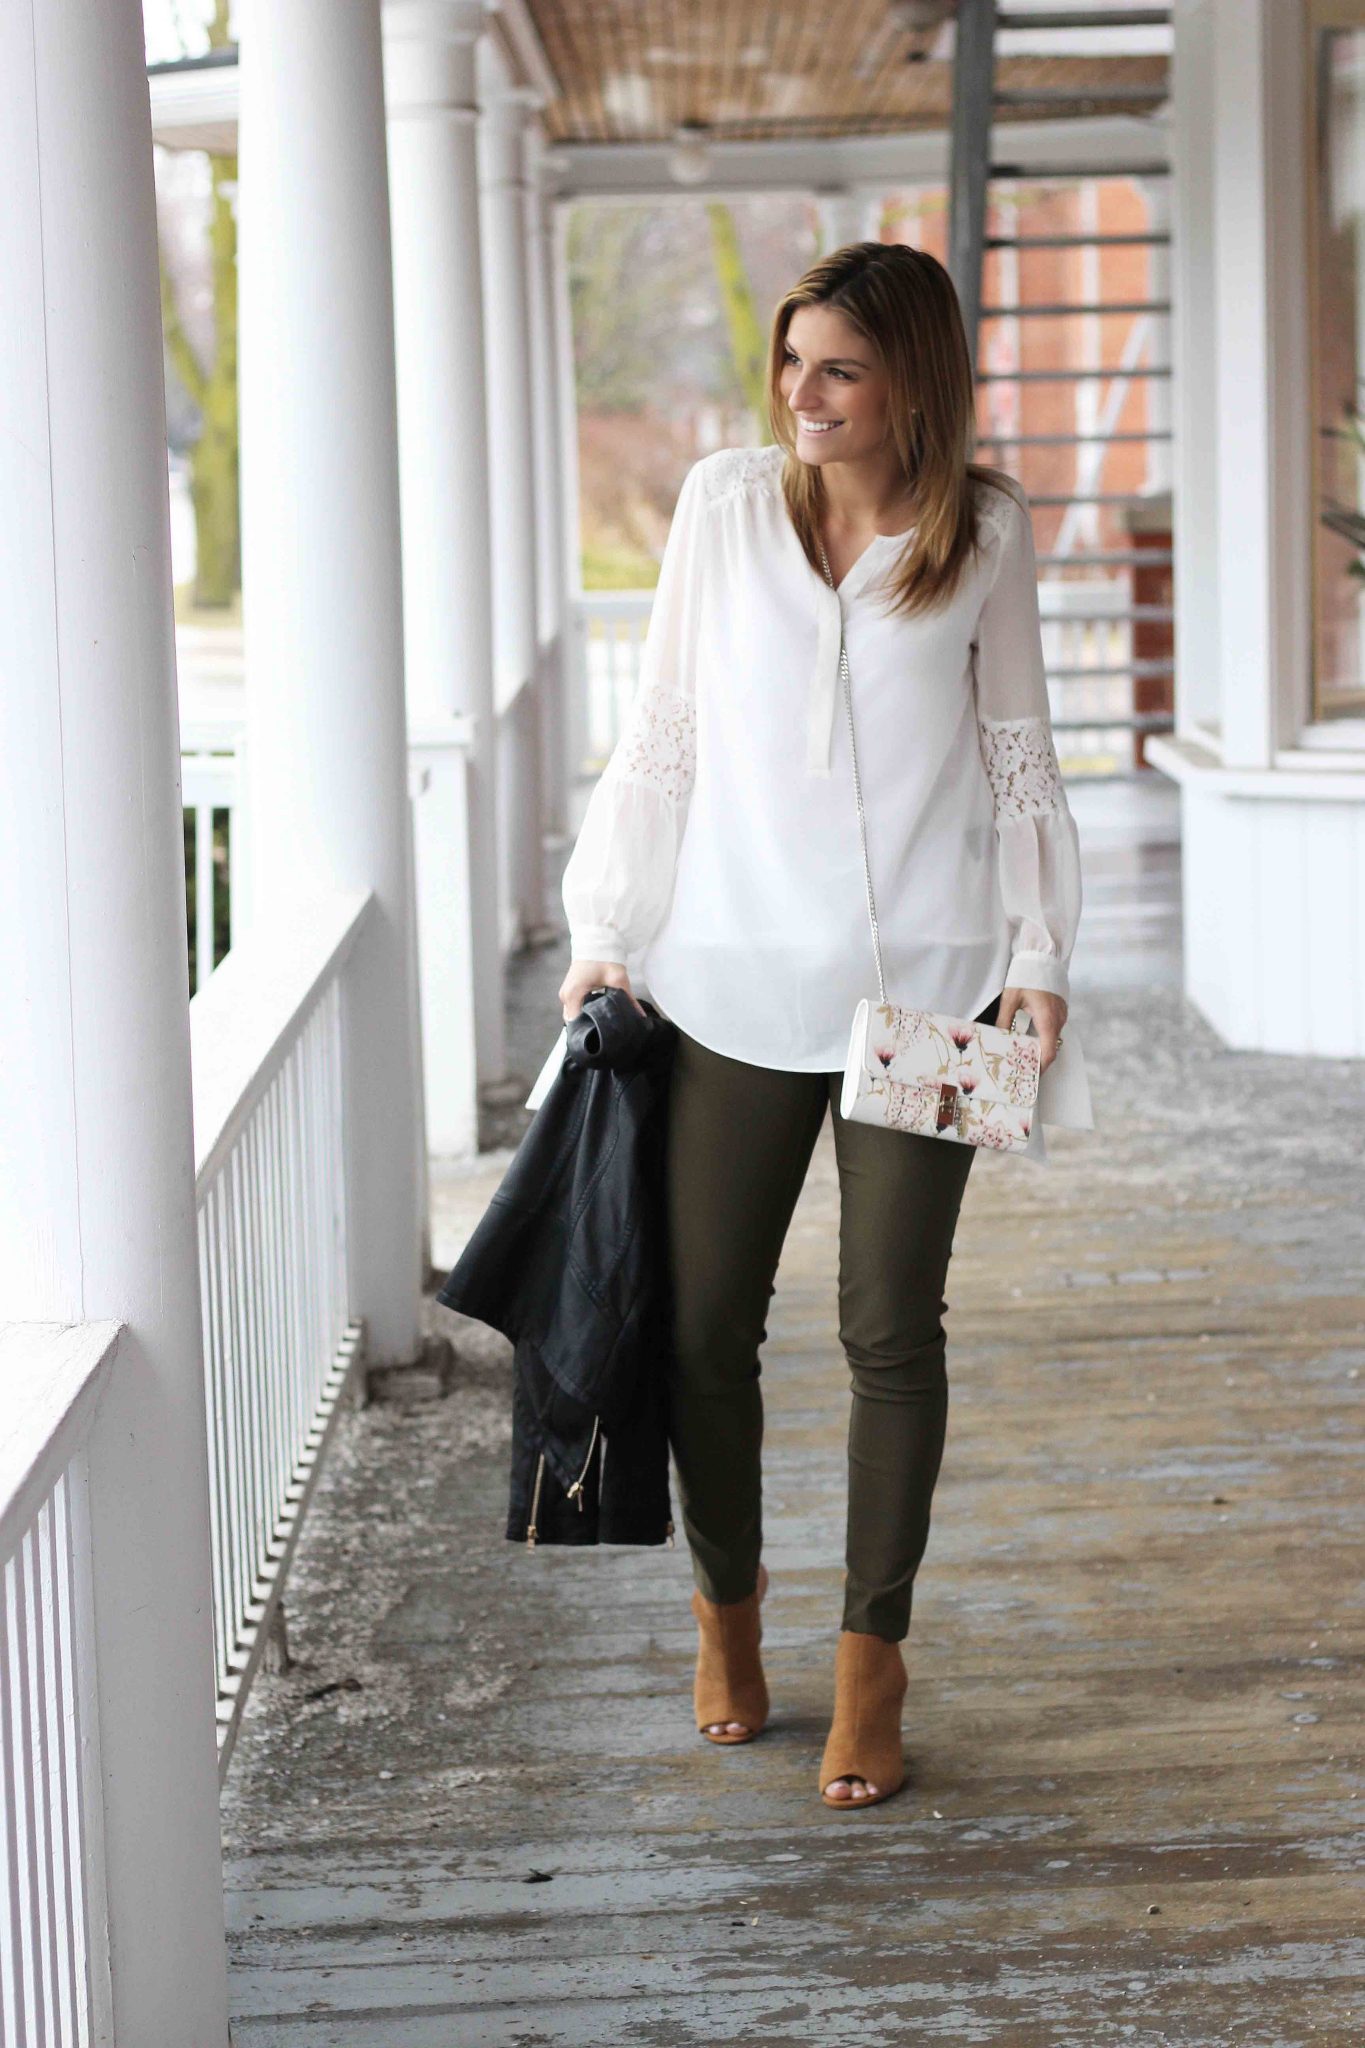 Spring Look From Le Chateau, White peasant blouse, olive green pants, black leather jacket, floral cross body bag, Suede peep toe shootie